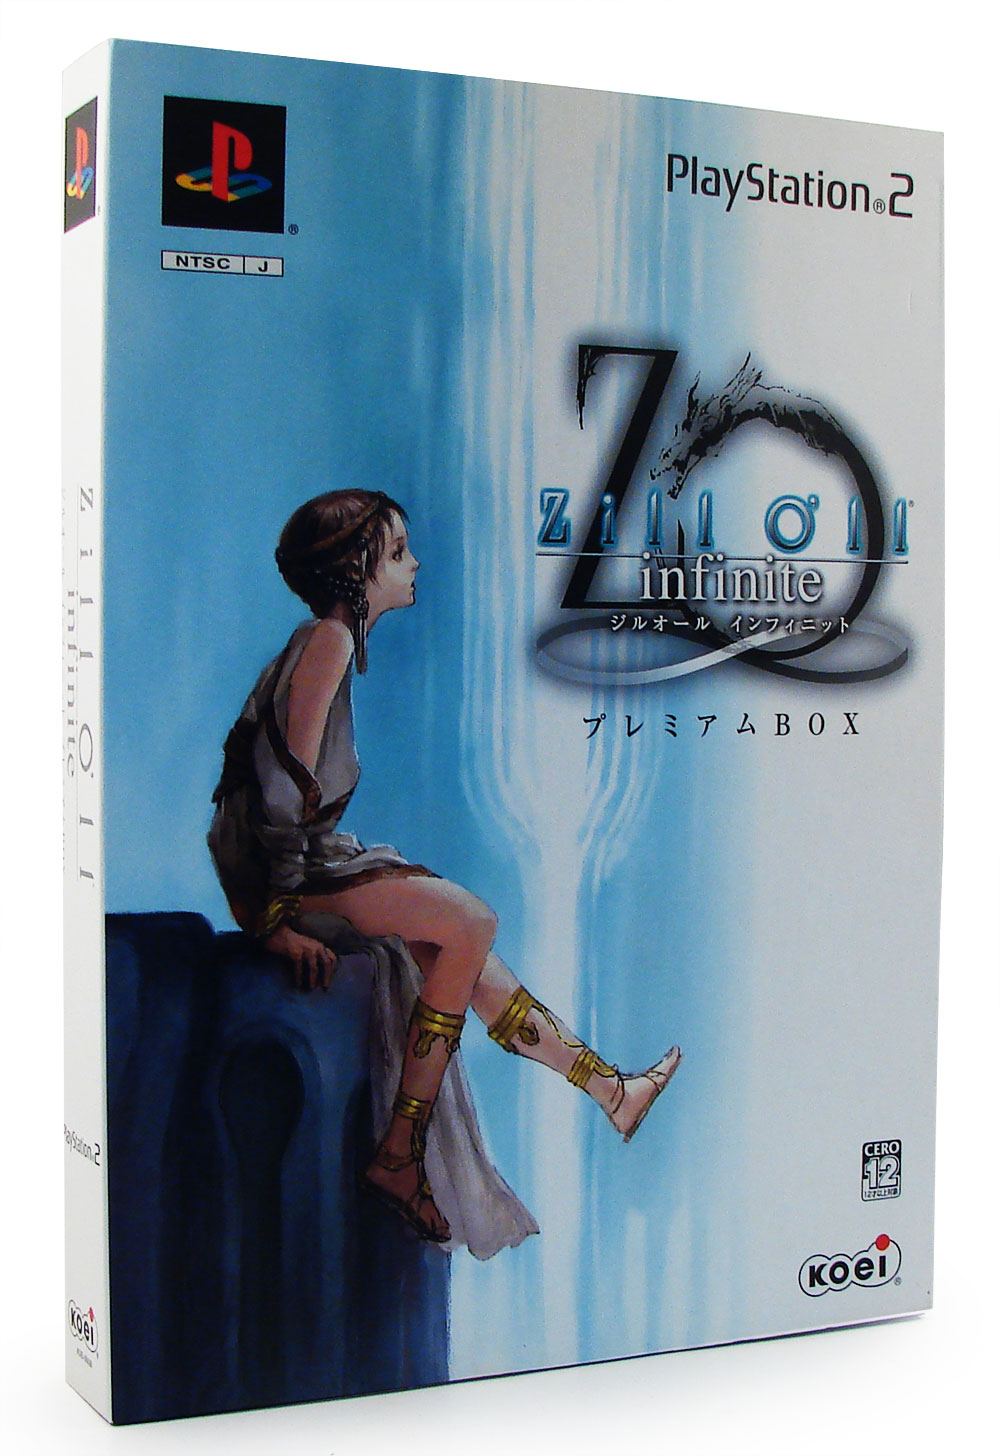 Zill O'll Infinite [Premium Box] for PlayStation 2 - Bitcoin & Lightning  accepted